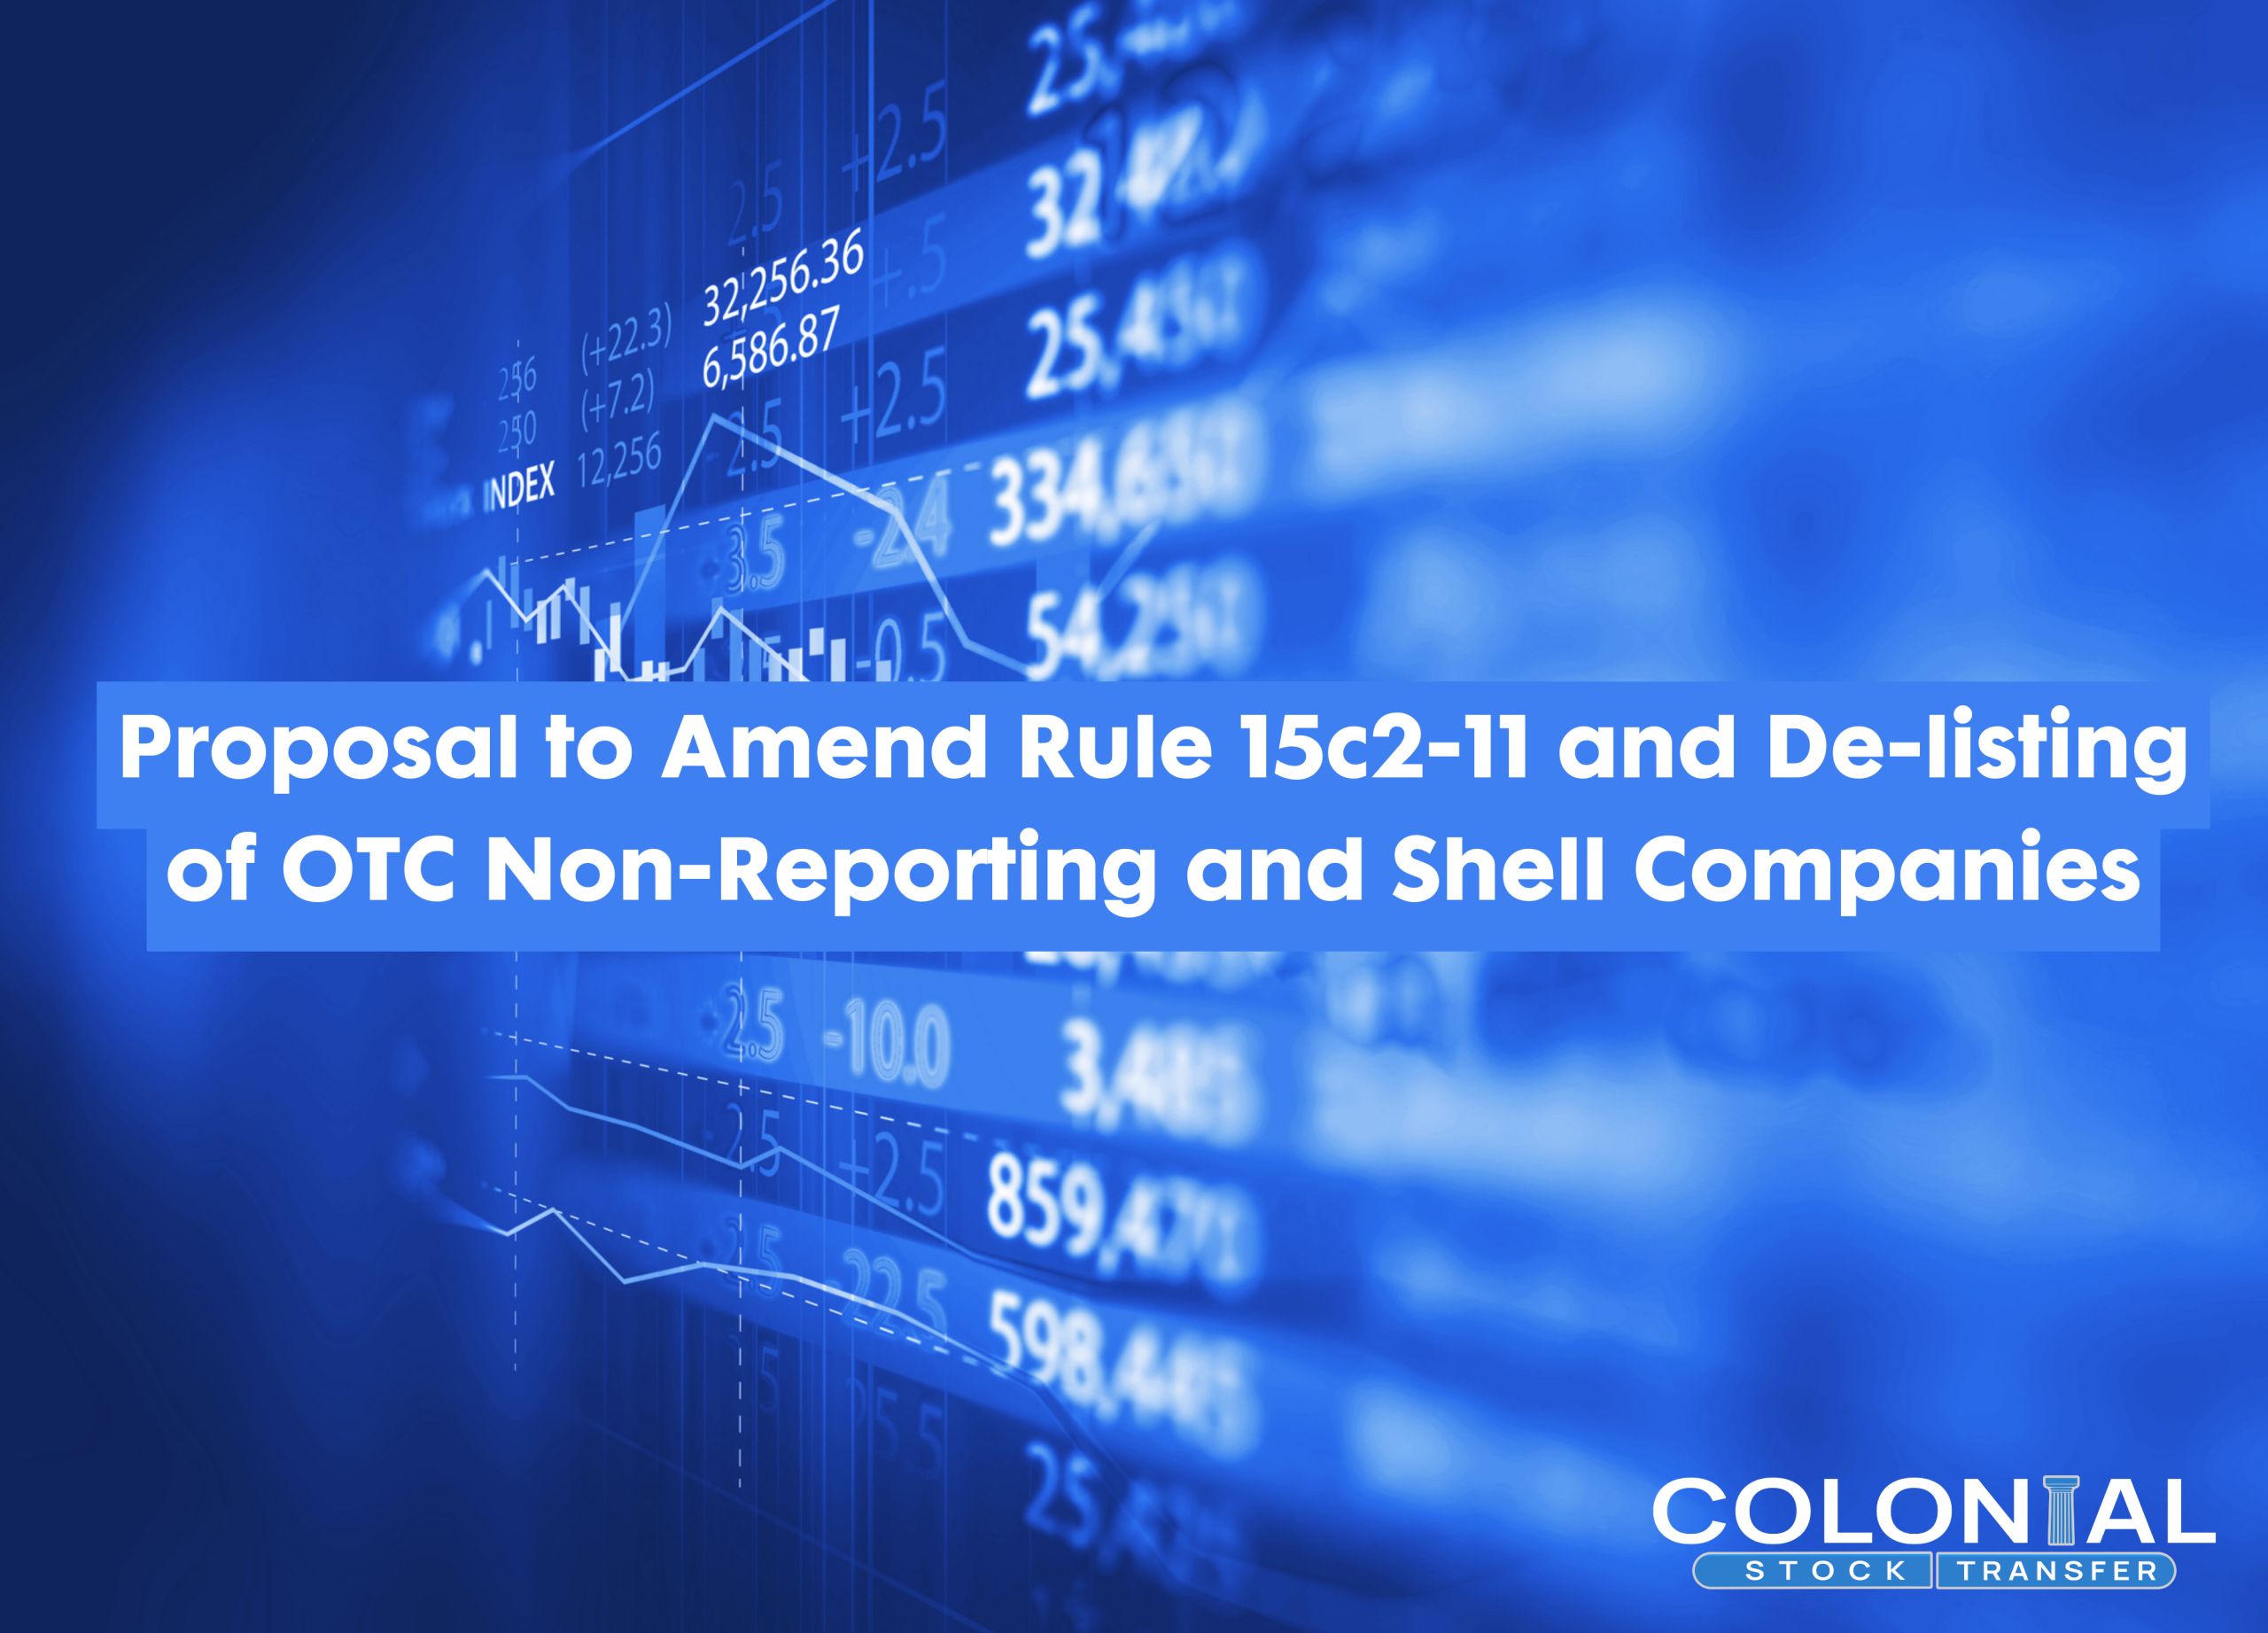 Proposal to Amend Rule 15c2-11 and De-listing of OTC Non-Reporting and Shell Companies